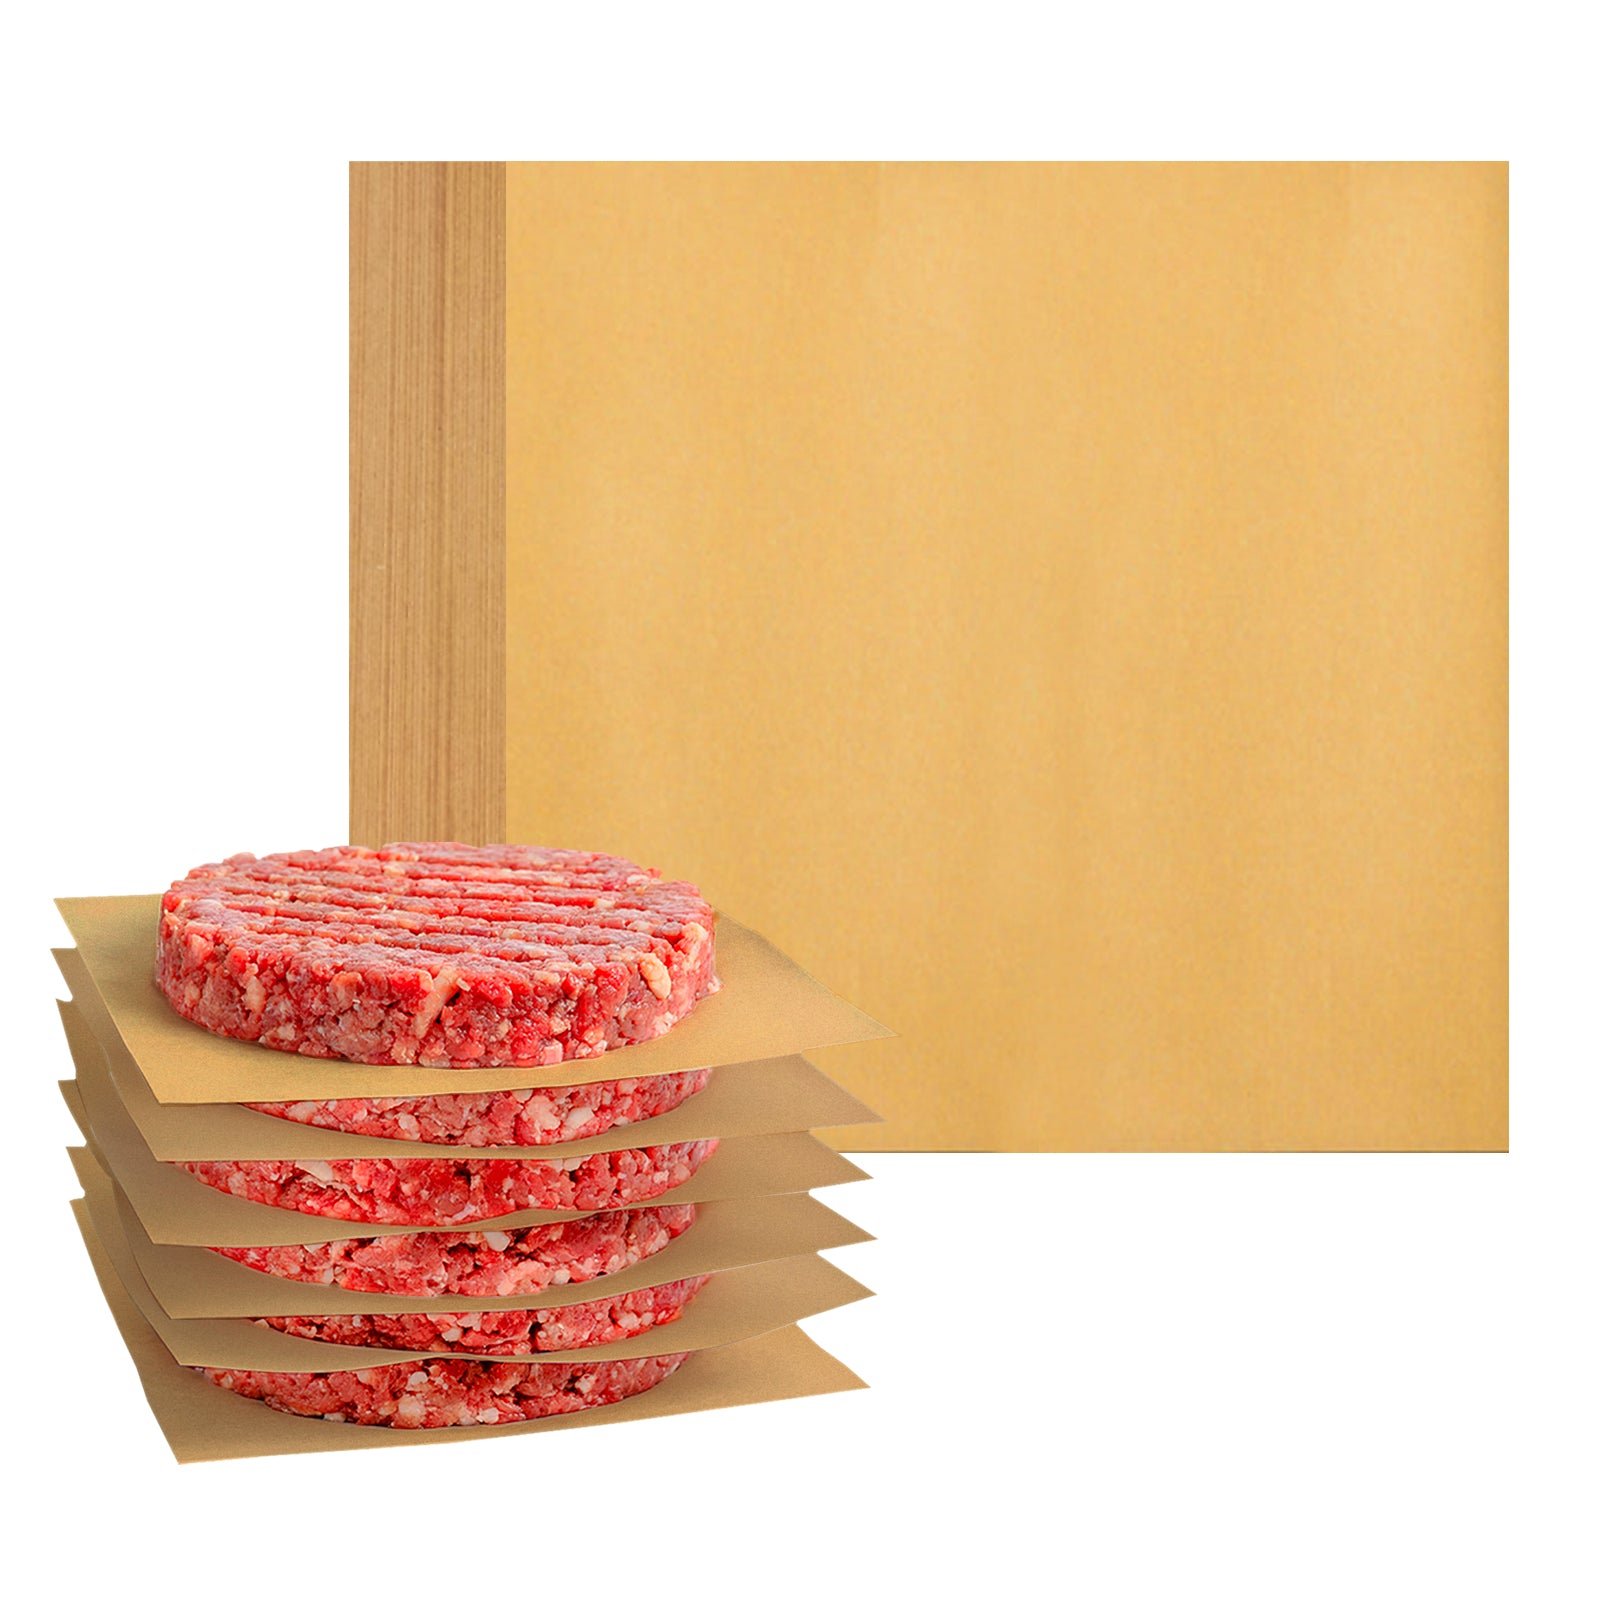 6 inch Wax Paper Squares, 250pcs – The Prepared Pantry